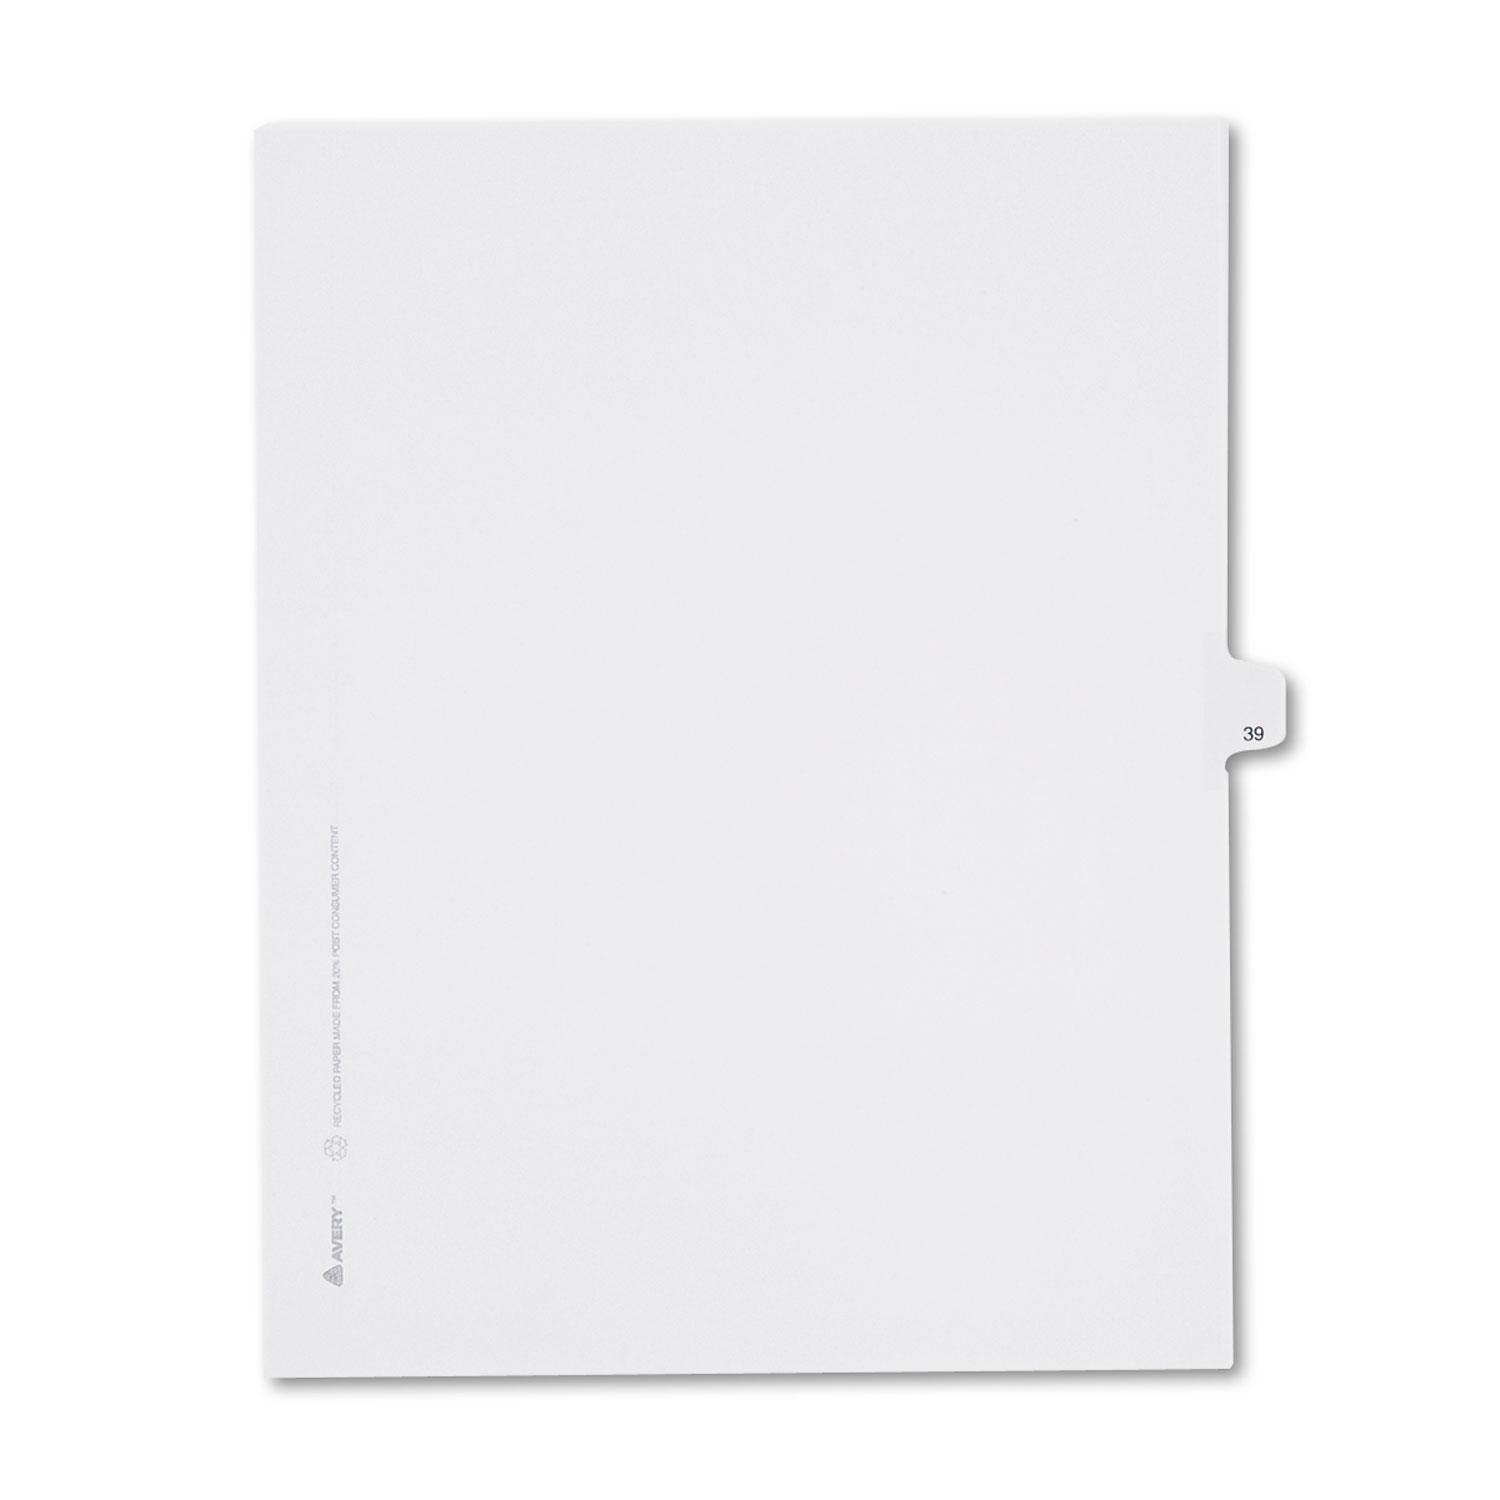  Avery 82237 Preprinted Legal Exhibit Side Tab Index Dividers, Allstate Style, 10-Tab, 39, 11 x 8.5, White, 25/Pack (AVE82237) 